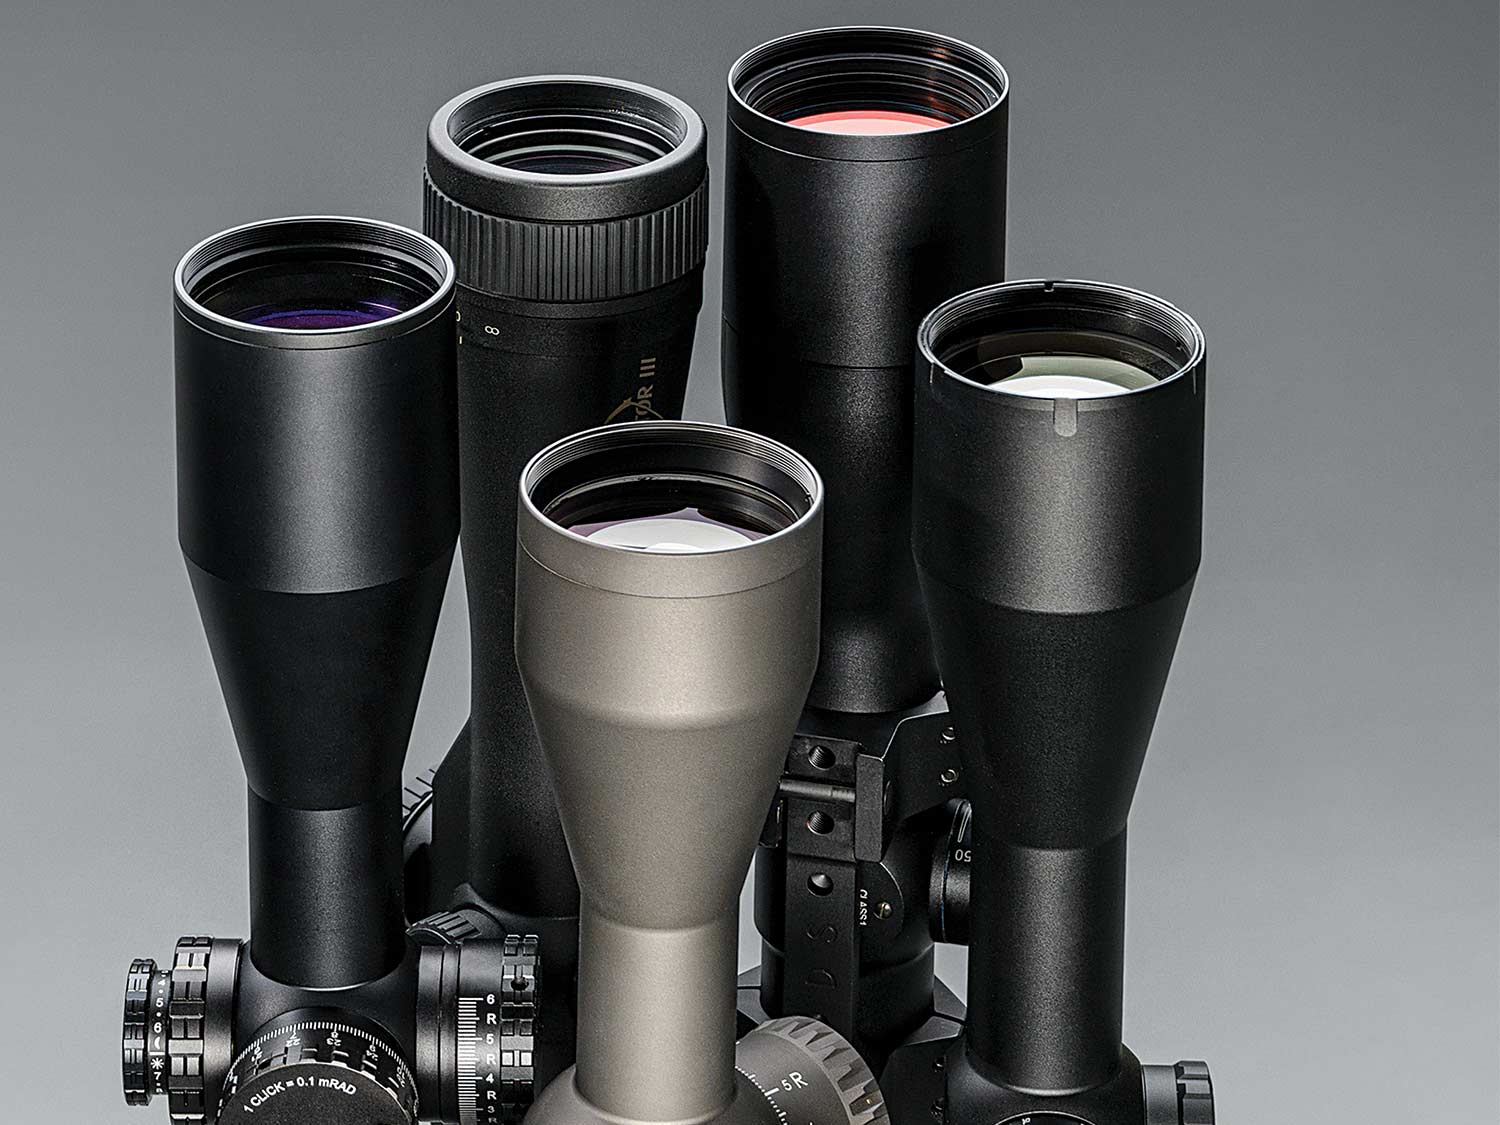 Five riflescopes arranged on a grey background.